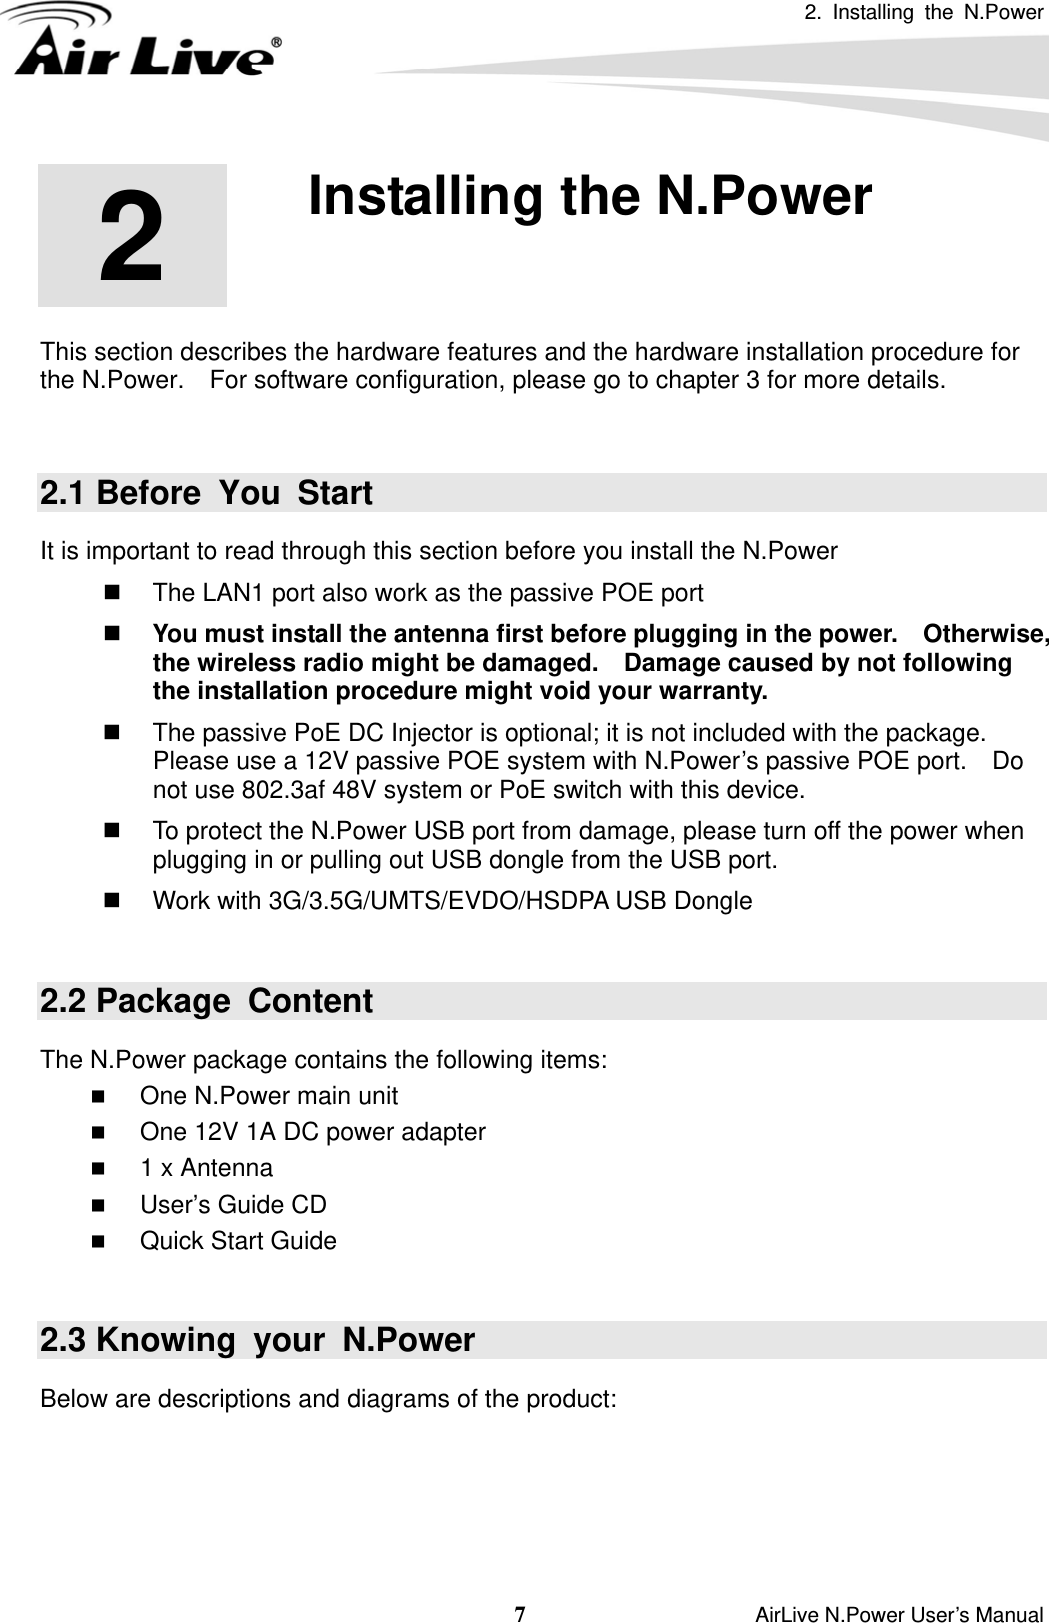 2. Installing the N.Power 7                    AirLive N.Power User’s Manual 2  2. Installing the N.Power  This section describes the hardware features and the hardware installation procedure for the N.Power.    For software configuration, please go to chapter 3 for more details.  2.1 Before You Start It is important to read through this section before you install the N.Power   The LAN1 port also work as the passive POE port    You must install the antenna first before plugging in the power.    Otherwise, the wireless radio might be damaged.    Damage caused by not following the installation procedure might void your warranty.   The passive PoE DC Injector is optional; it is not included with the package.   Please use a 12V passive POE system with N.Power’s passive POE port.    Do not use 802.3af 48V system or PoE switch with this device.   To protect the N.Power USB port from damage, please turn off the power when plugging in or pulling out USB dongle from the USB port.         Work with 3G/3.5G/UMTS/EVDO/HSDPA USB Dongle    2.2 Package  Content The N.Power package contains the following items:    One N.Power main unit  One 12V 1A DC power adapter  1 x Antenna  User’s Guide CD  Quick Start Guide   2.3 Knowing  your  N.Power Below are descriptions and diagrams of the product:    